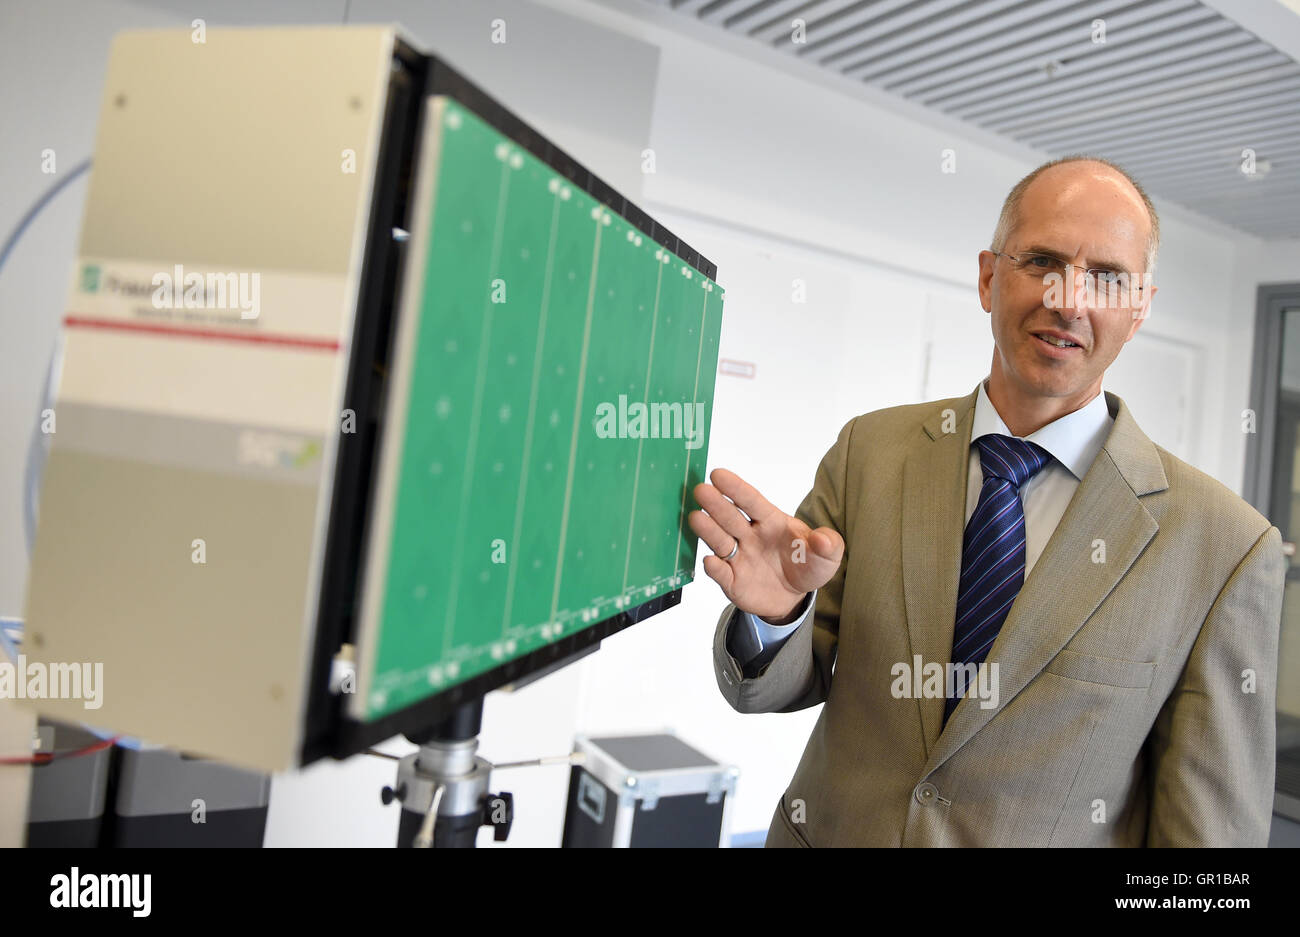 Berlin, Germany. 5th Sep, 2016. Thomas Haustein, a researcher at the Fraunhofer Heinrich-Hertz-Institut, presents the '5G Radio Massive MIMO' antenna technology while explaining research work on the 5G mobile communication standard, at the Fraunhofer Heinrich-Hertz-Institut in Berlin, Germany, 5 September 2016. Berlin is to be the location for the development of the 5G network. PHOTO: BRITTA PEDERSEN/DPA/Alamy Live News Stock Photo